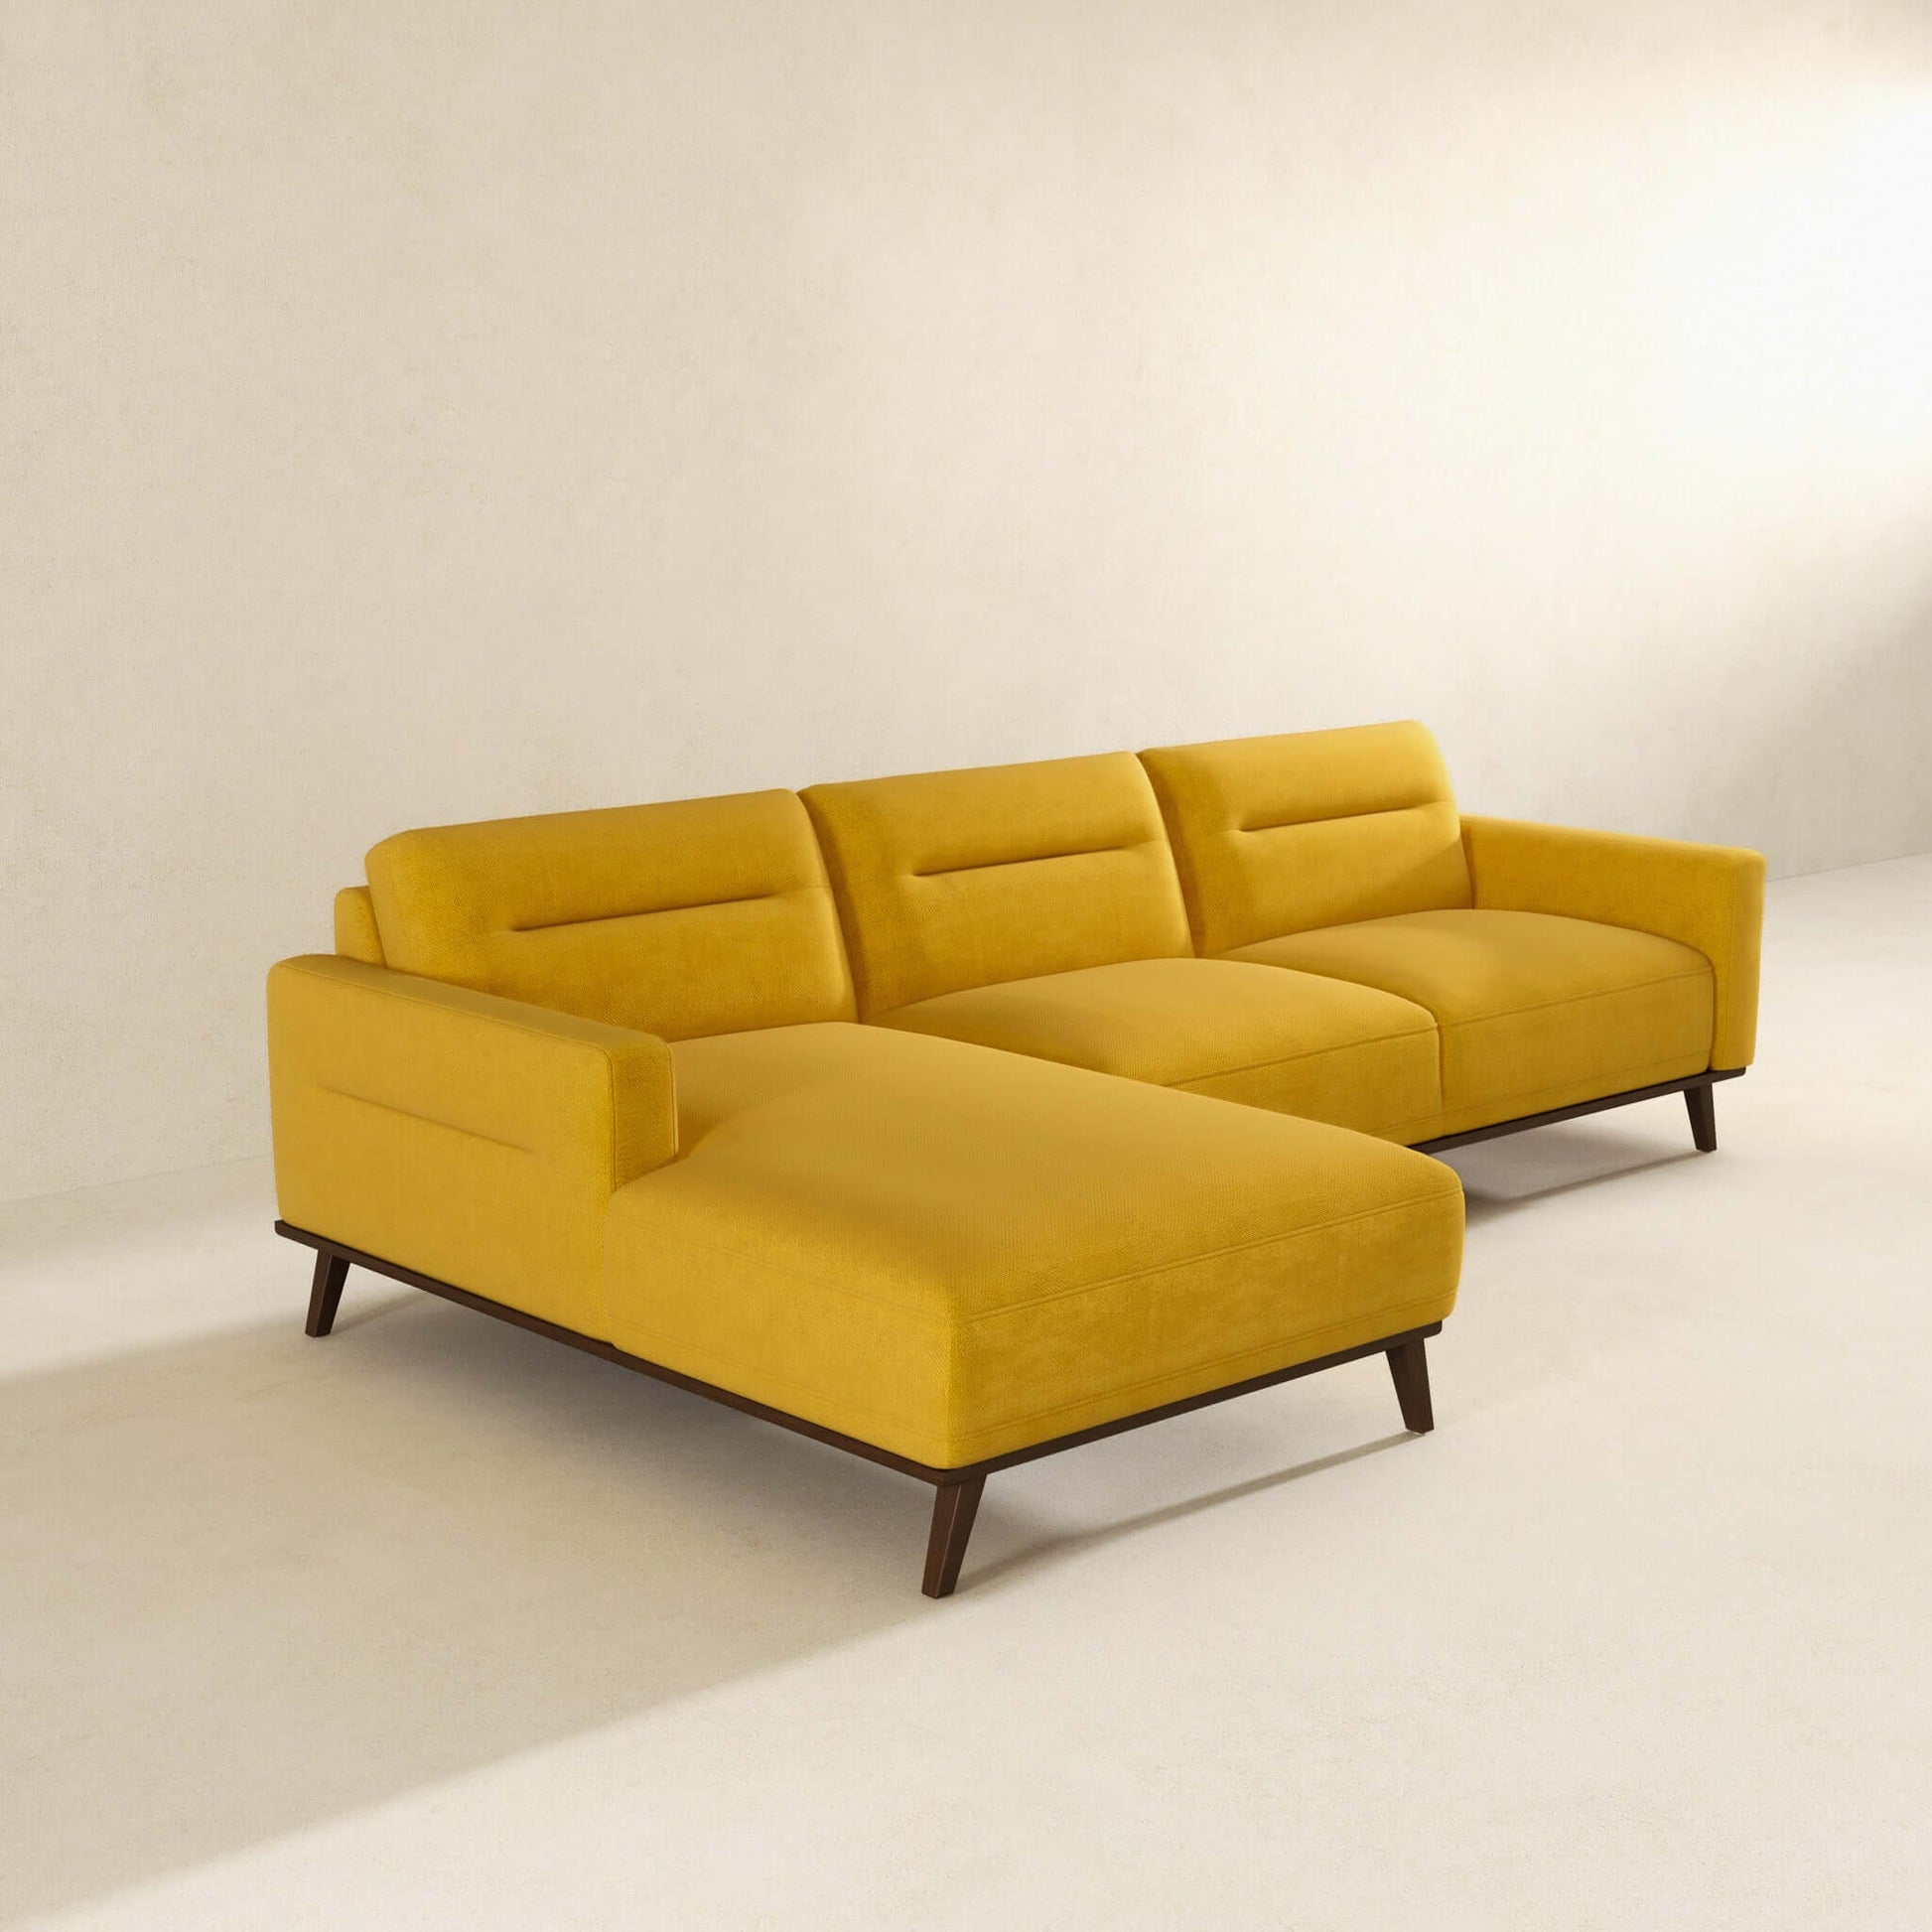 Ashcroft Furniture Co Sectional Sofas Ella L-Shaped Dark Yellow Linen Left Sectional Couch